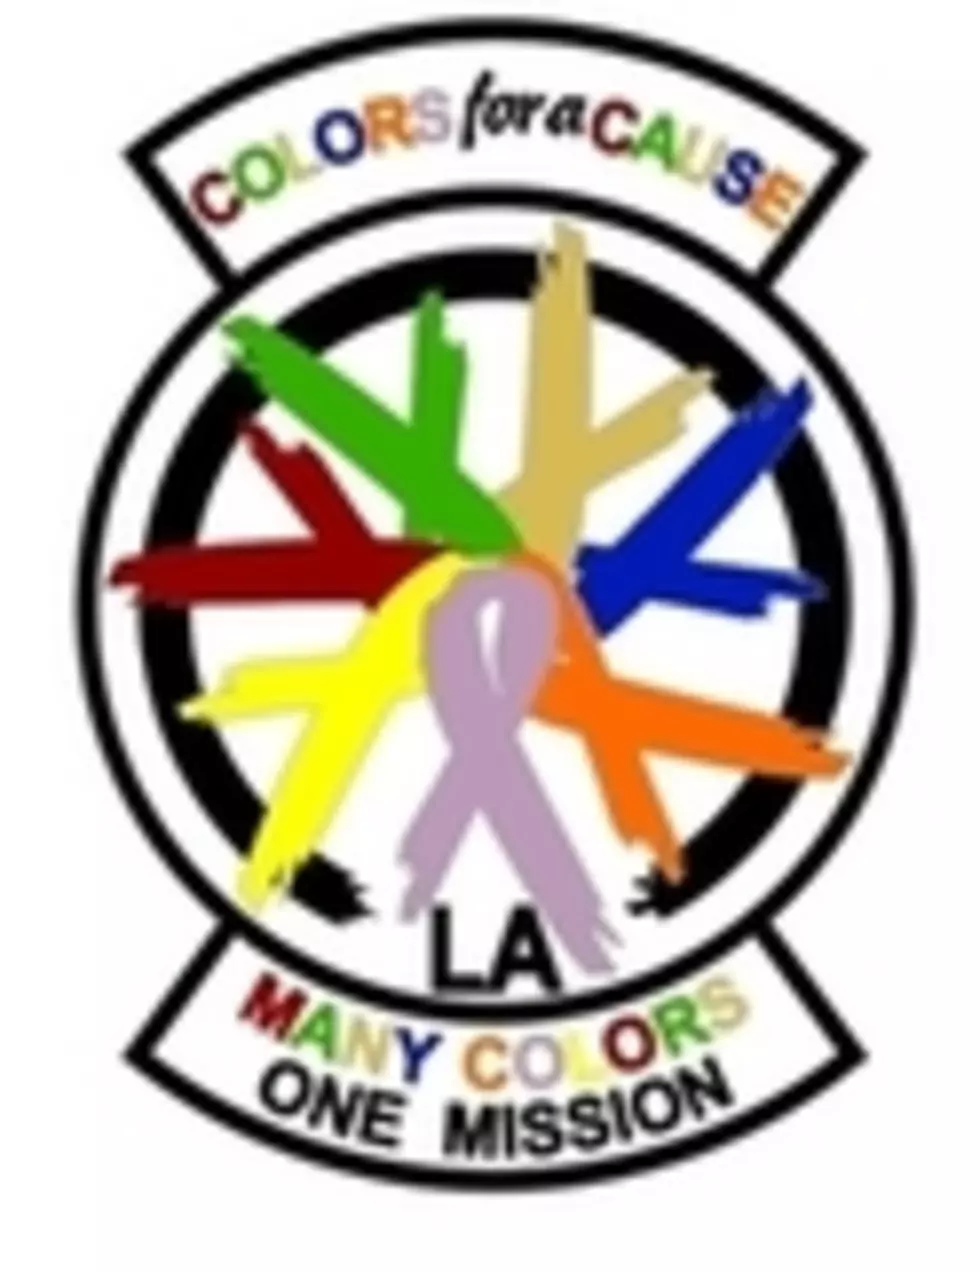 Don’t Miss The Color For A Cause September 1st